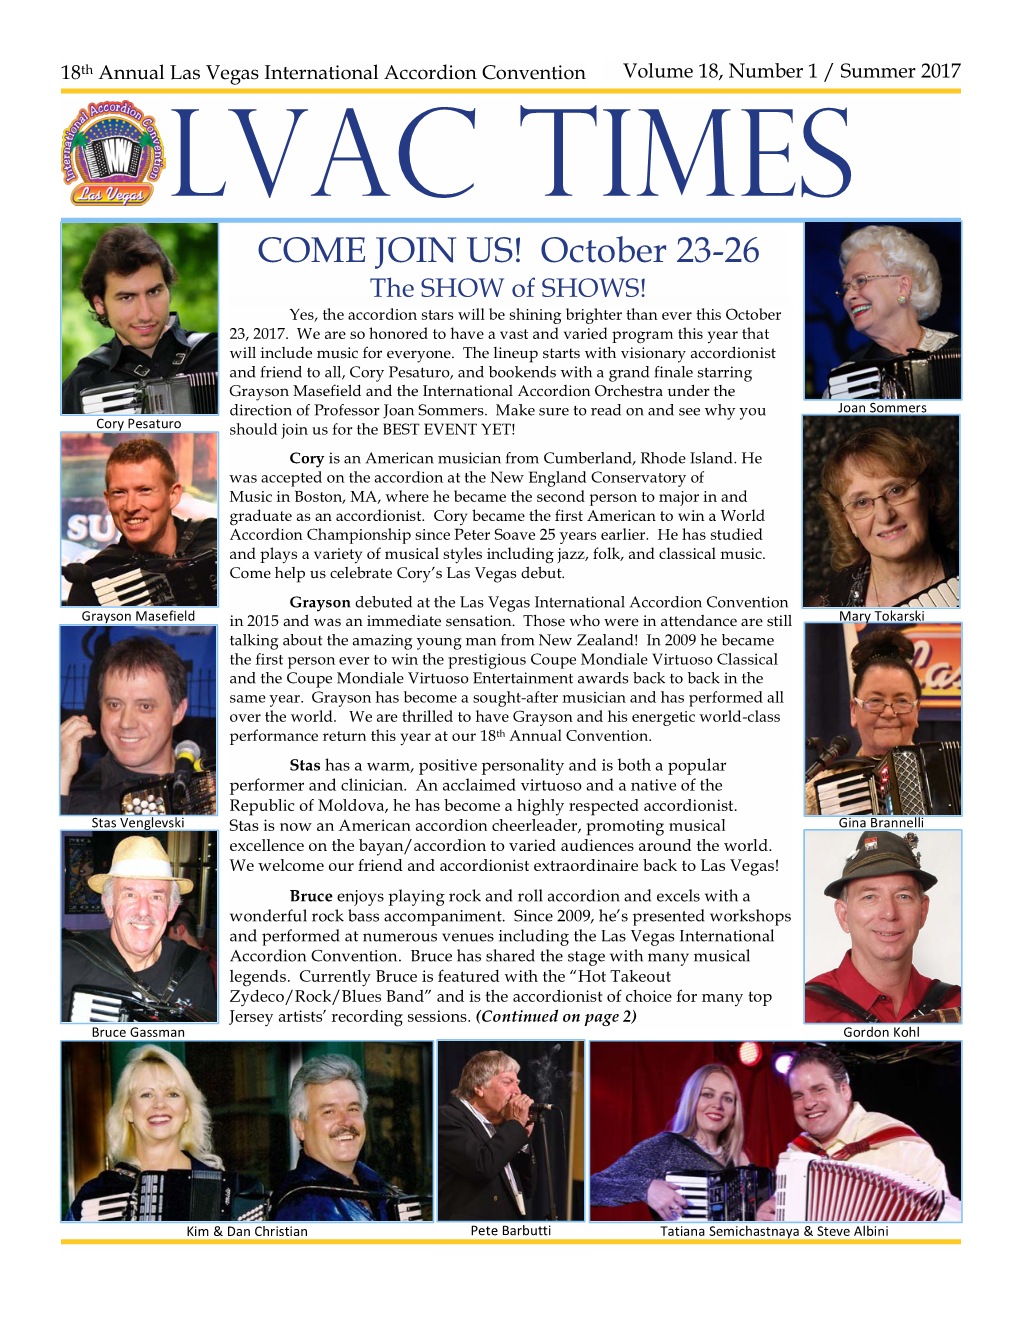 Summer 2017 LVAC TIMES COME JOIN US! October 23-26 the SHOW of SHOWS! Yes, the Accordion Stars Will Be Shining Brighter Than Ever This October 23, 2017